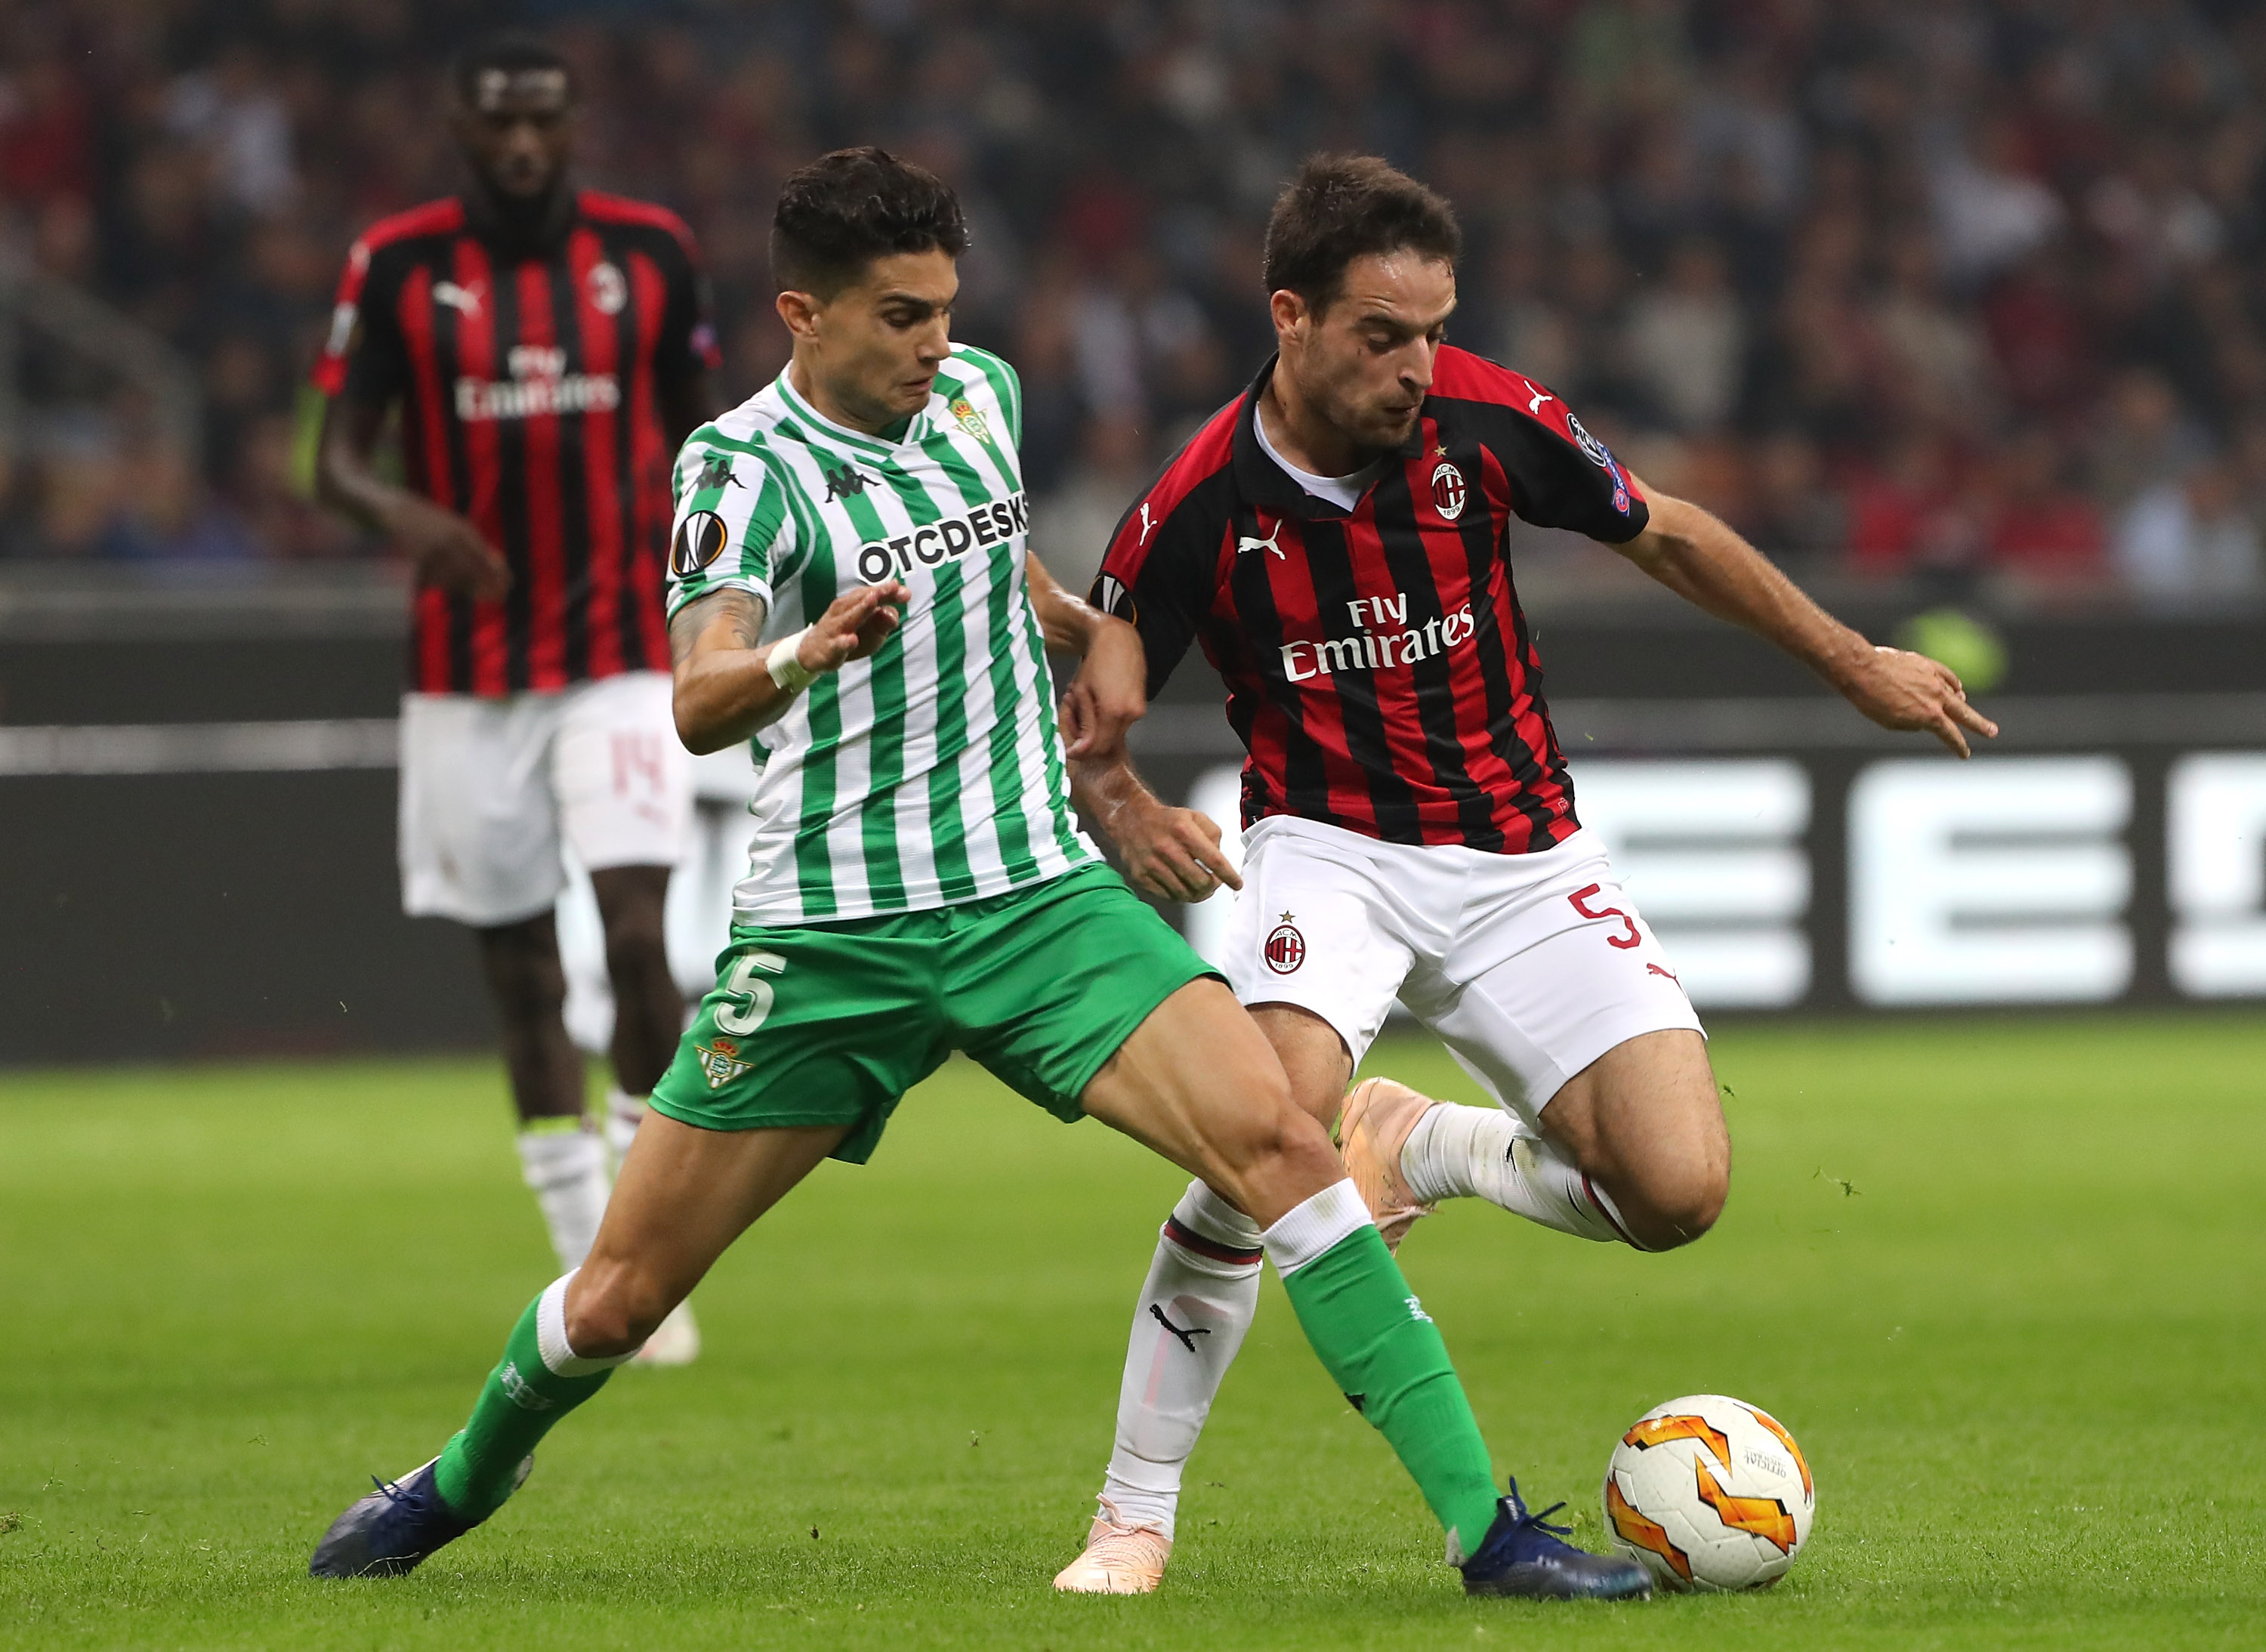 MILAN, ITALY - OCTOBER 25: Giacomo Bonaventura (R) of AC Milan competes for the ball with Marc Bartra (L) of Real Betis during the UEFA Europa League Group F match between AC Milan and Real Betis at Stadio Giuseppe Meazza on October 25, 2018 in Milan, Italy. (Photo by Marco Luzzani/Getty Images)